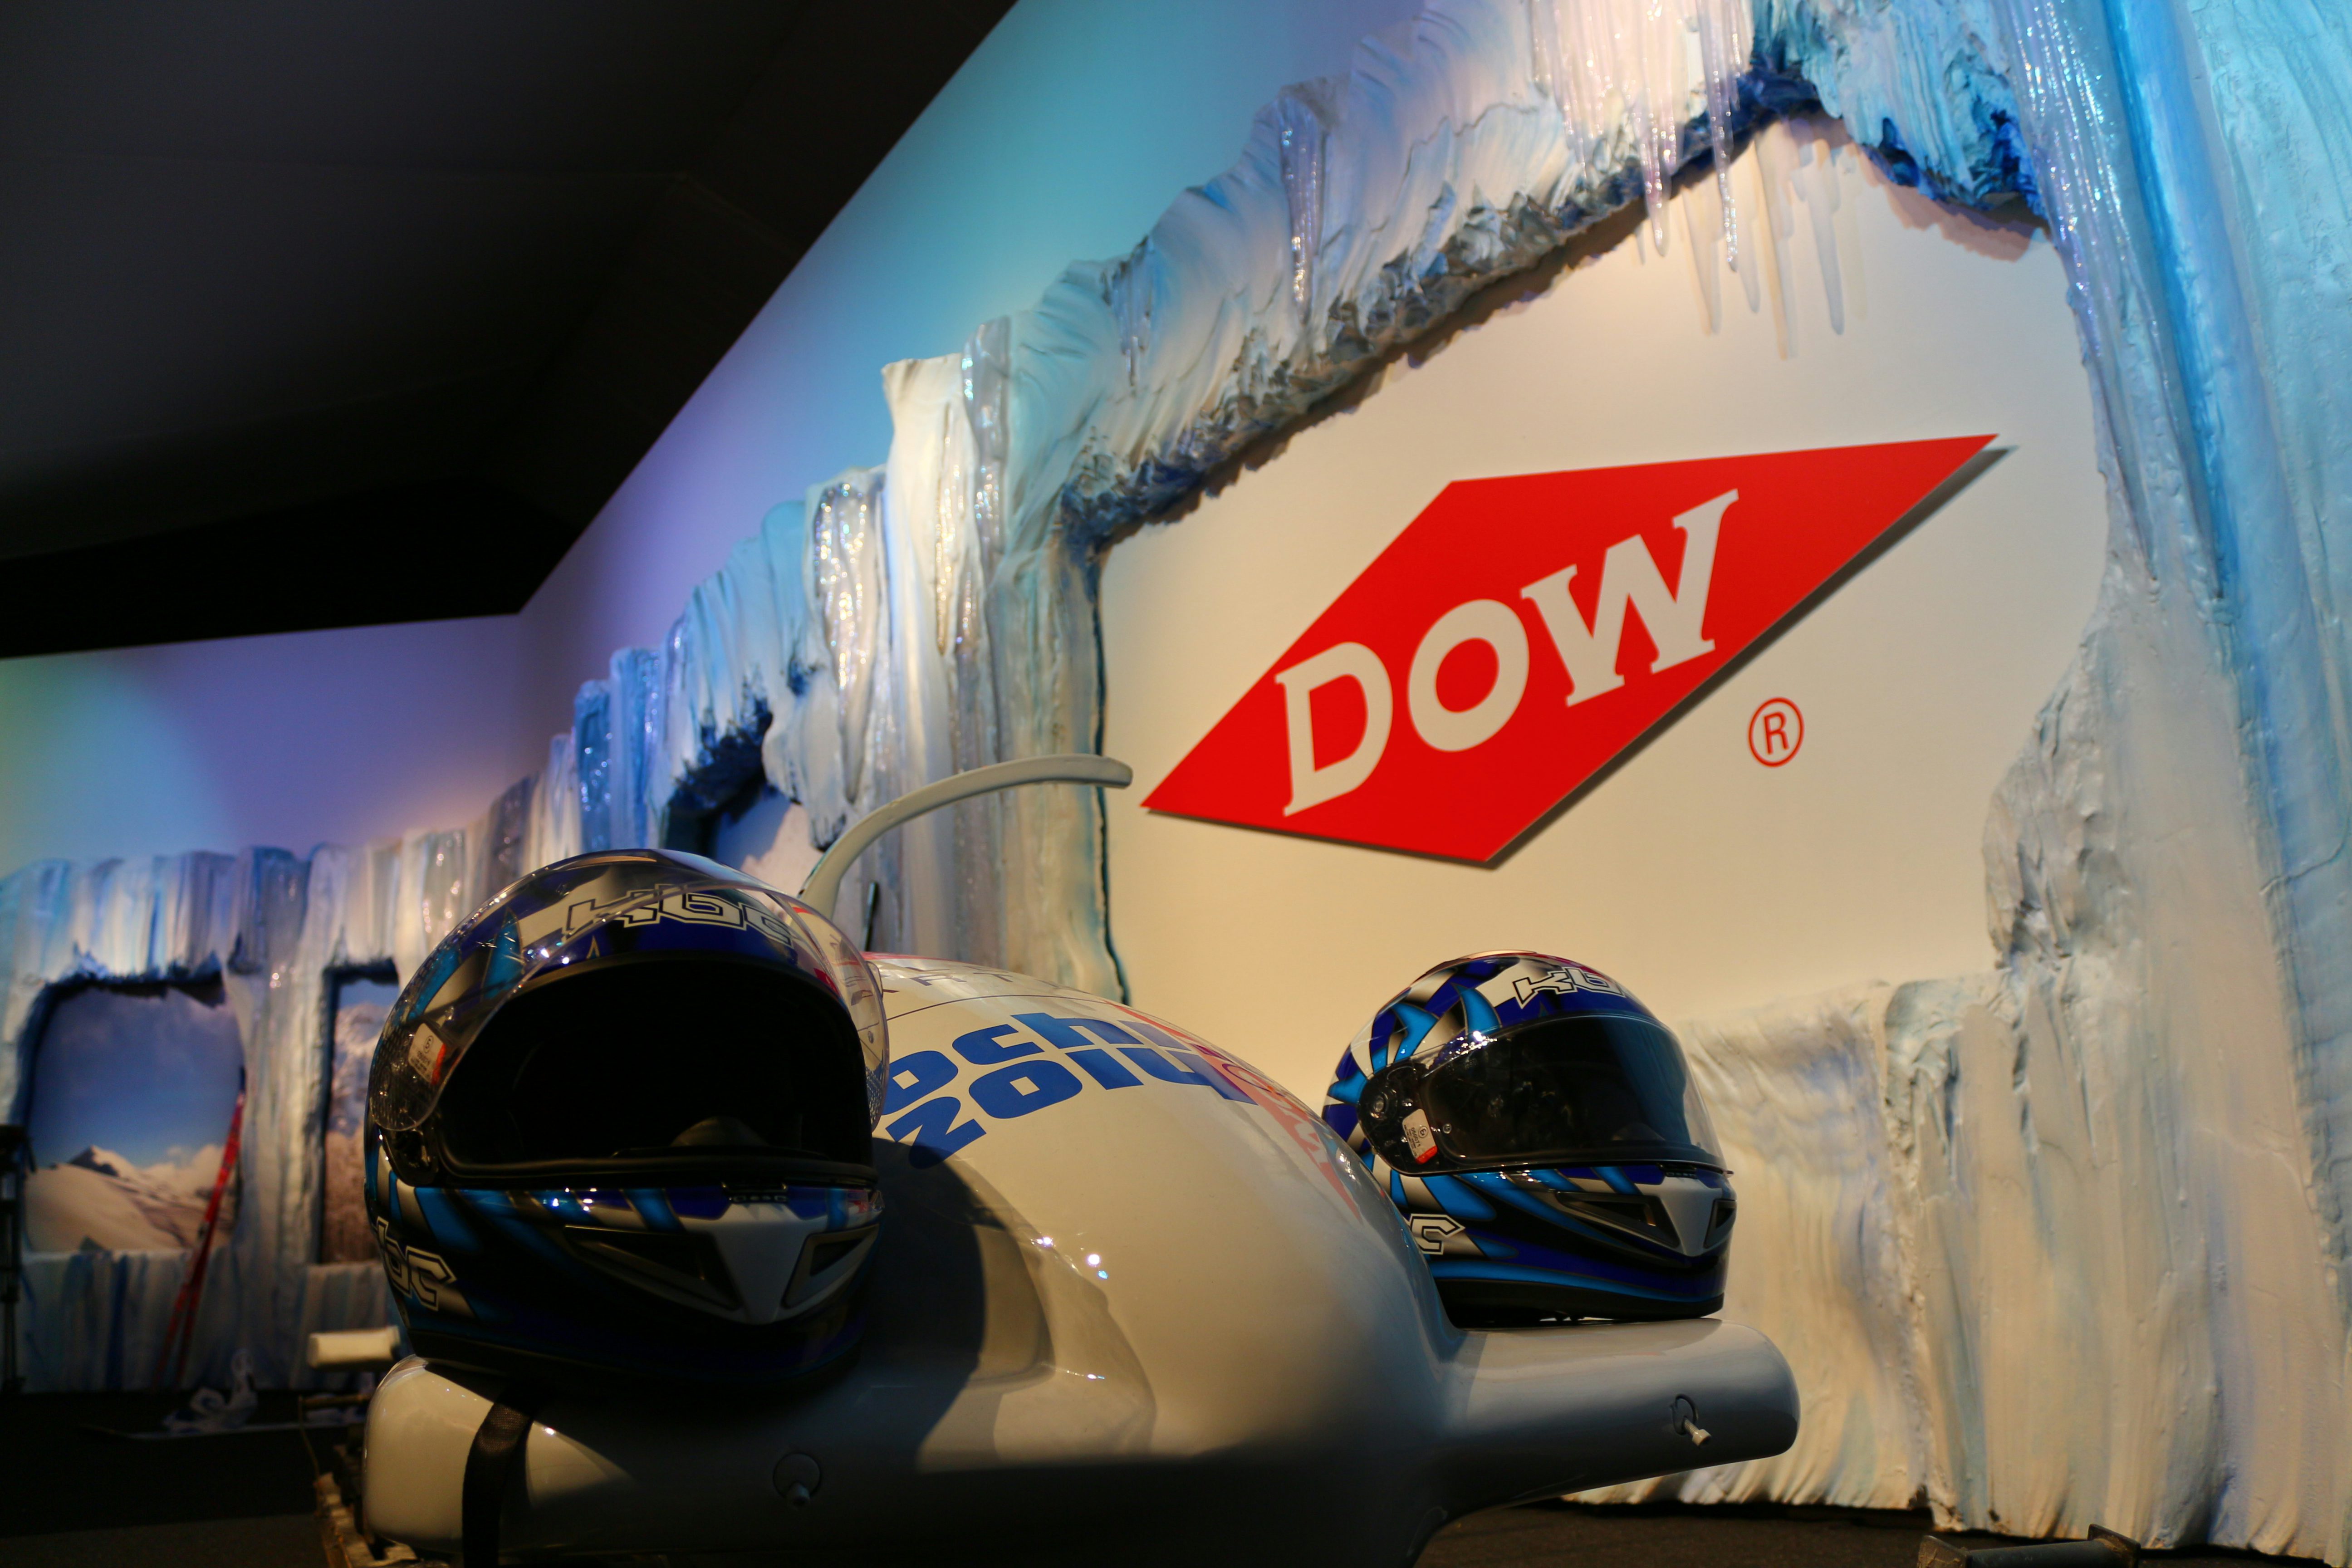 Dow experiential